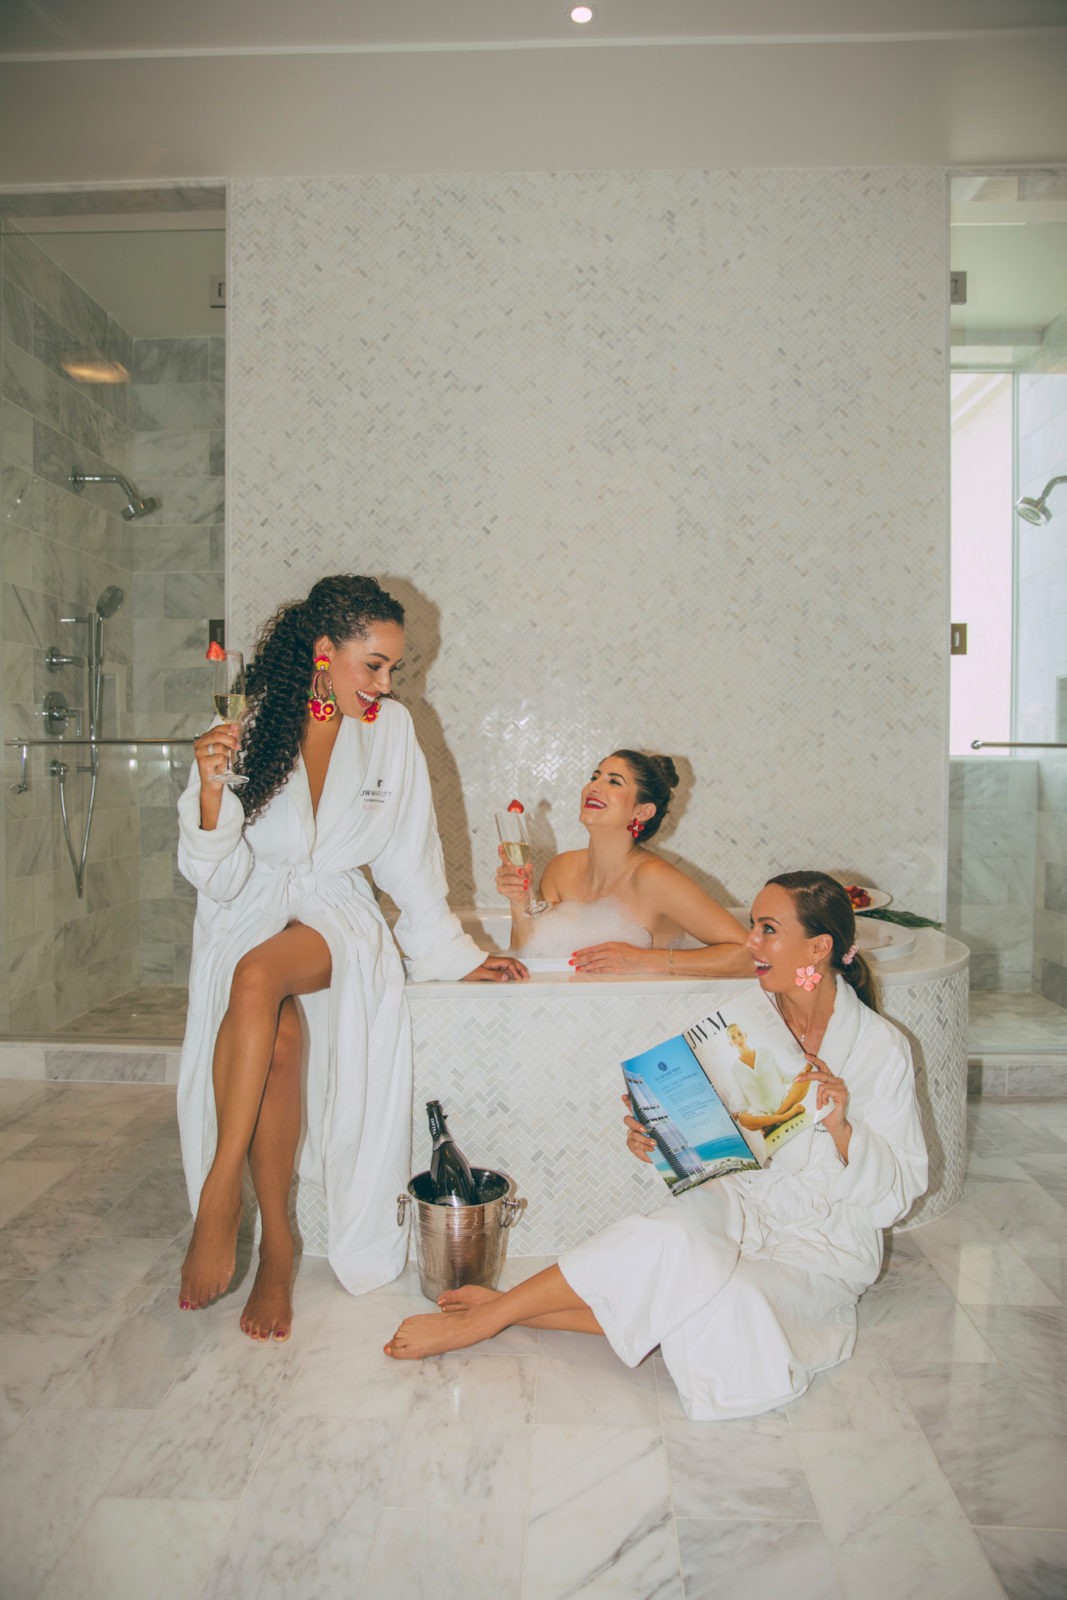 JW Marriott Turnberry Resort Miami by popular travel blogger, Laura Lily: image of a woman and her two friends sitting by a tub with bubbles in it while they drink champagne. 